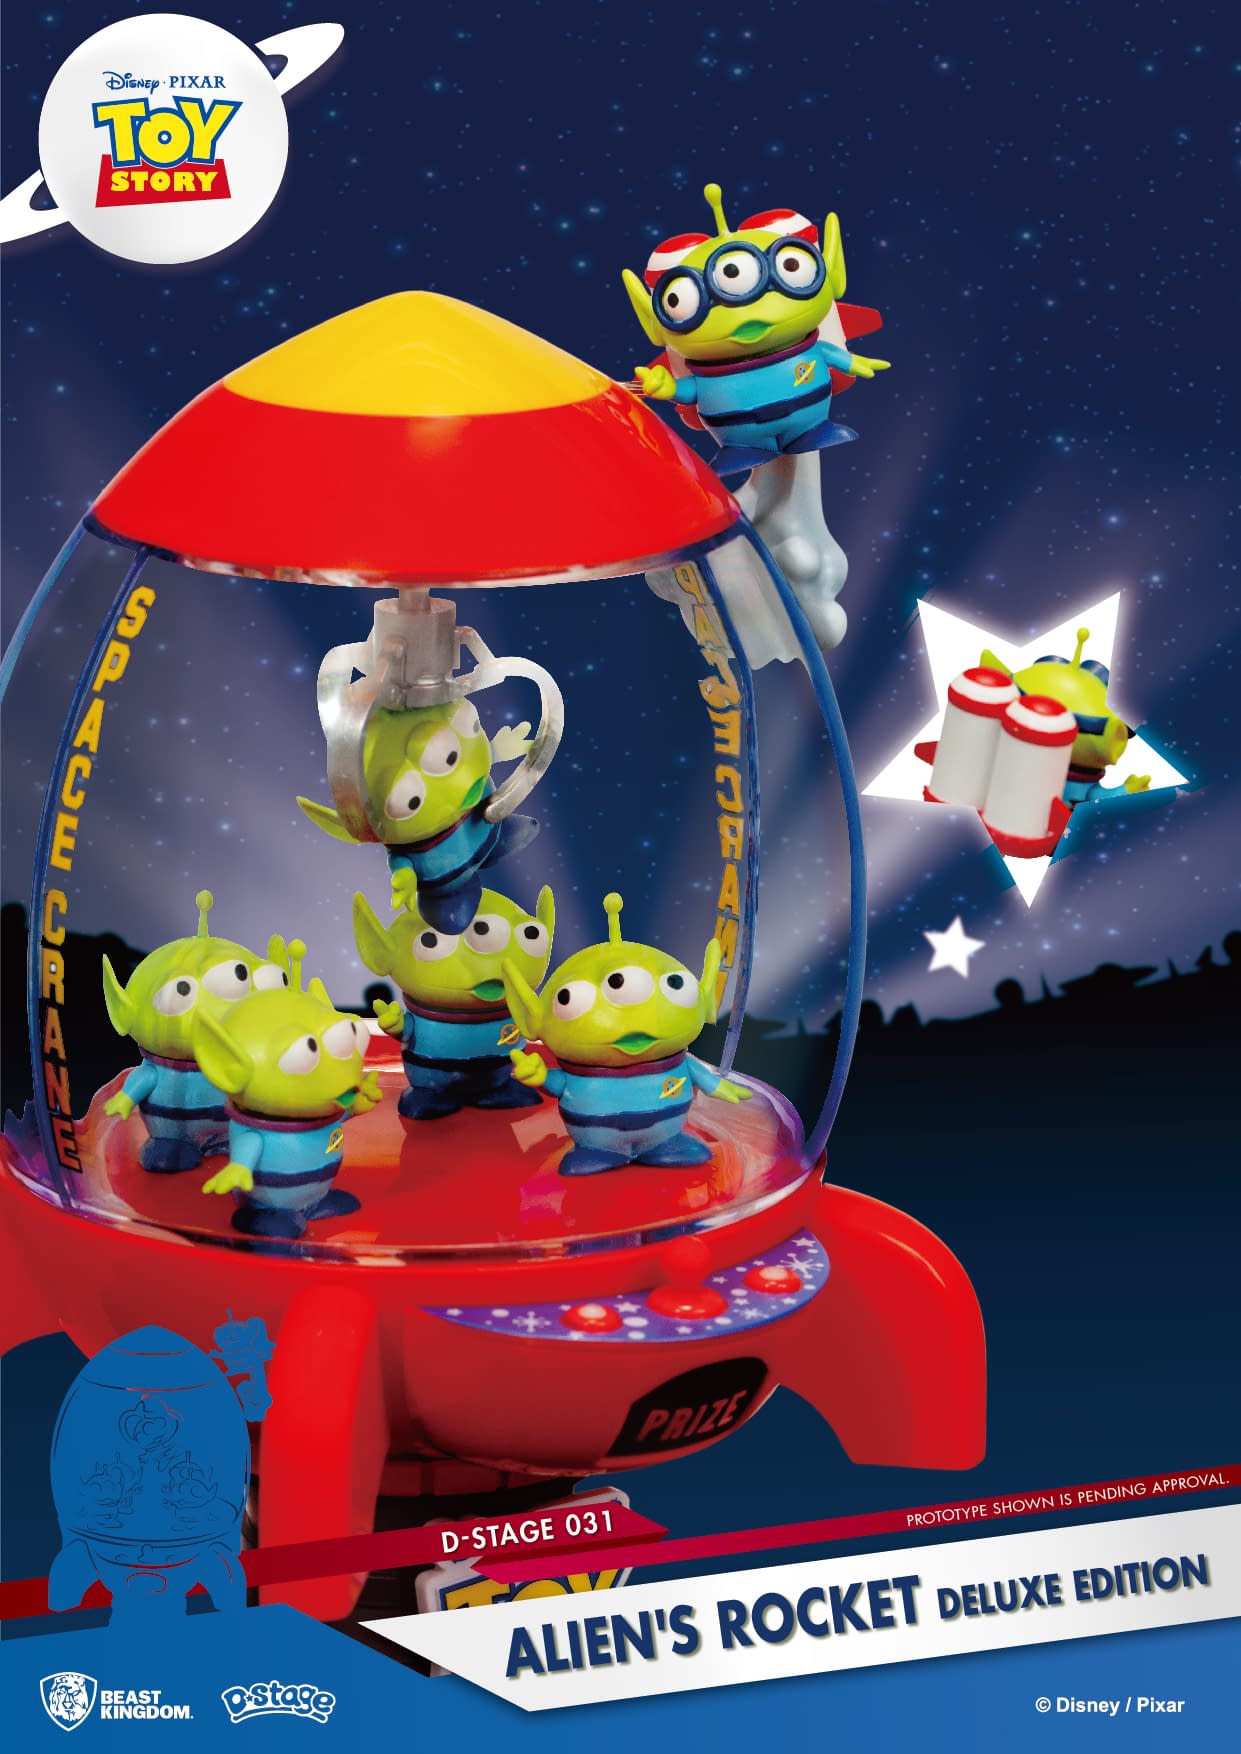 Pizza Planet Awaits with Beast Kingdom’s New Toy Story D-Stage